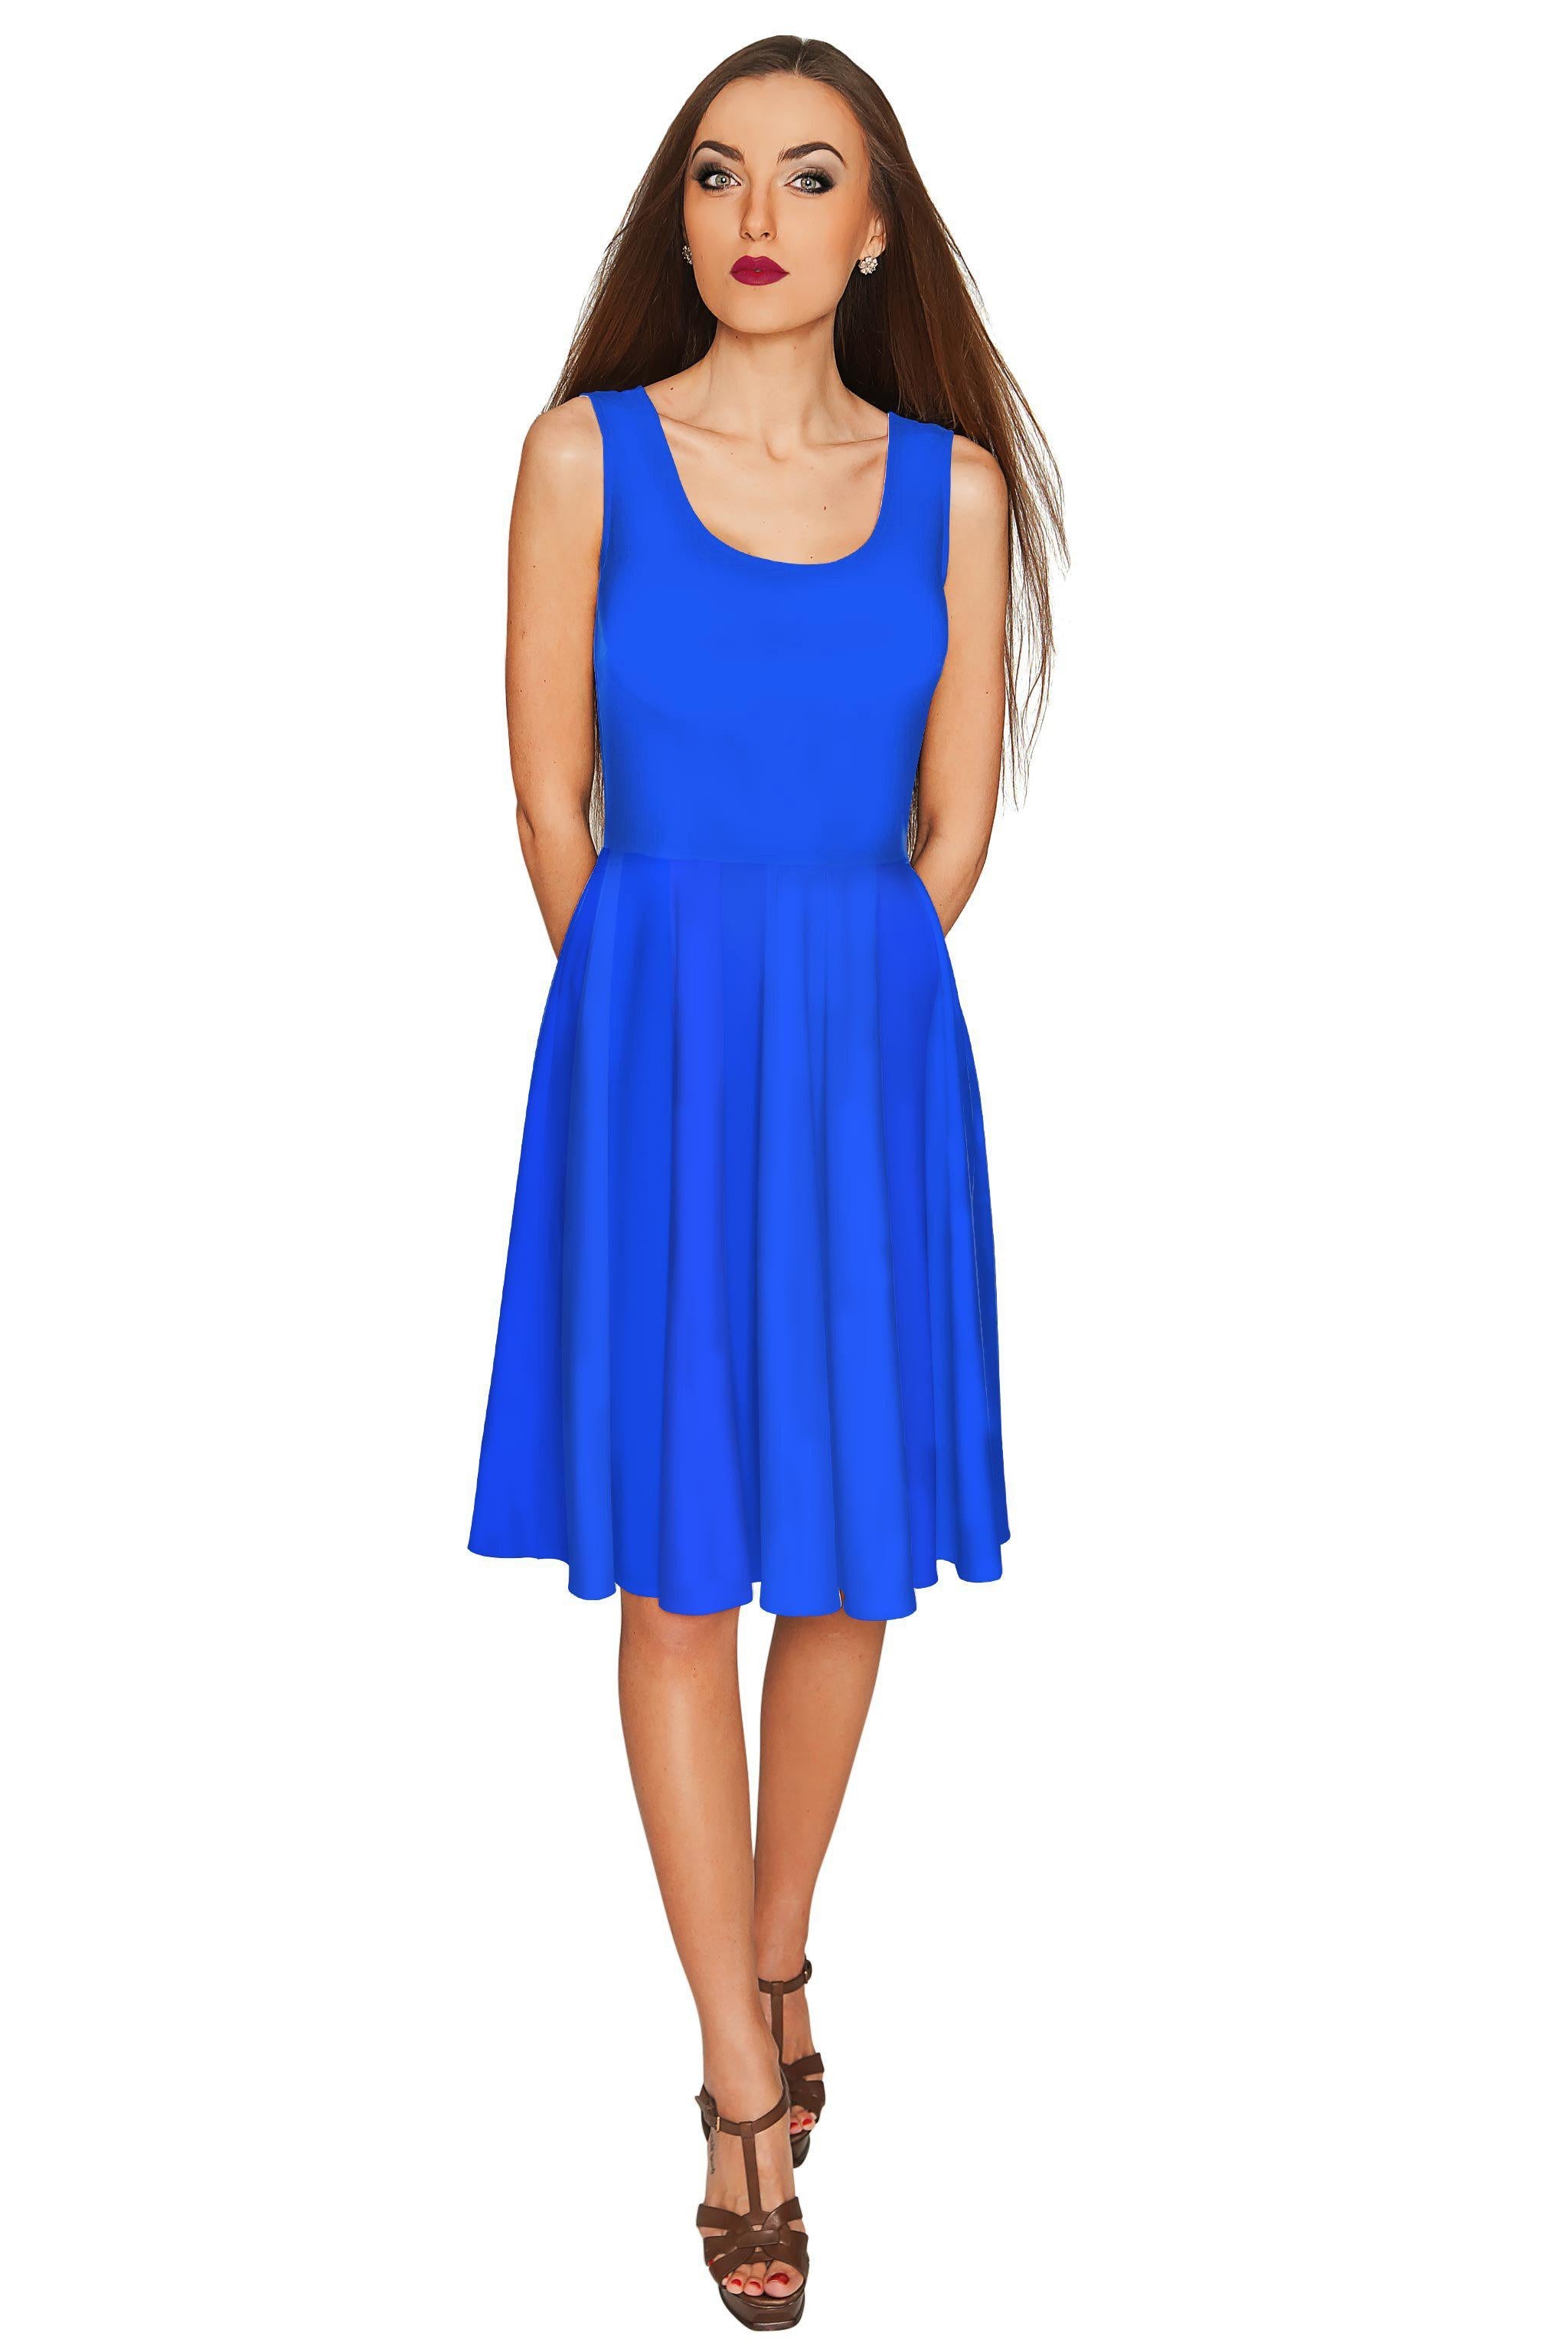 3 for $49! Royal Blue Stretchy Sleeveless Fit & Flare Midi Dress - Women - Pineapple Clothing